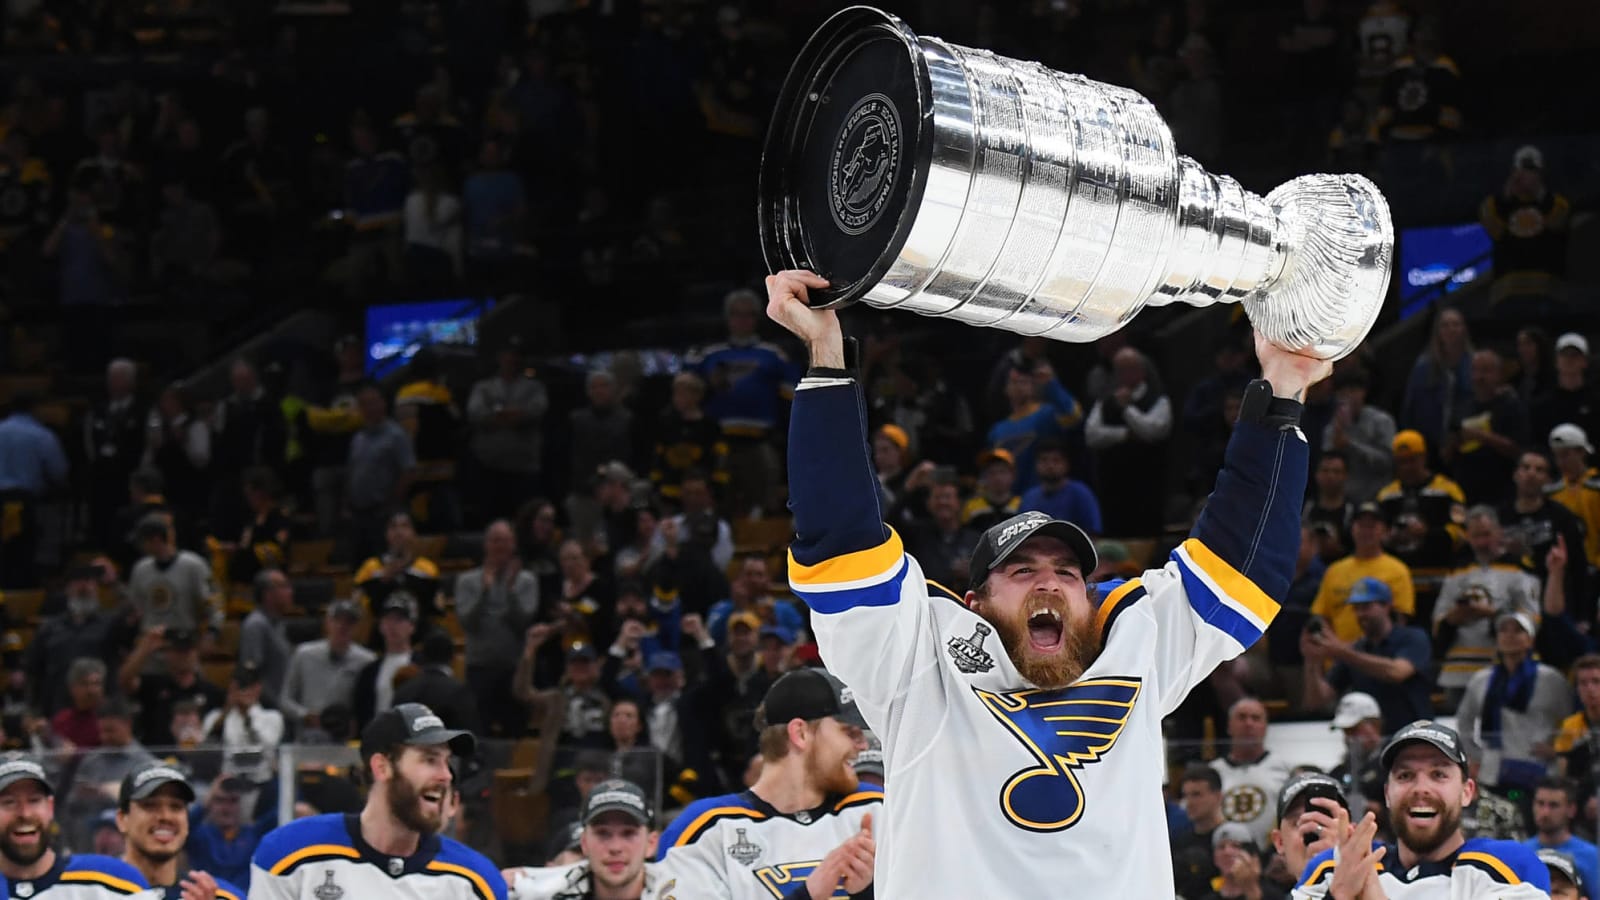 Ryan O'Reilly joins Wayne Gretzky in Stanley Cup Final record books